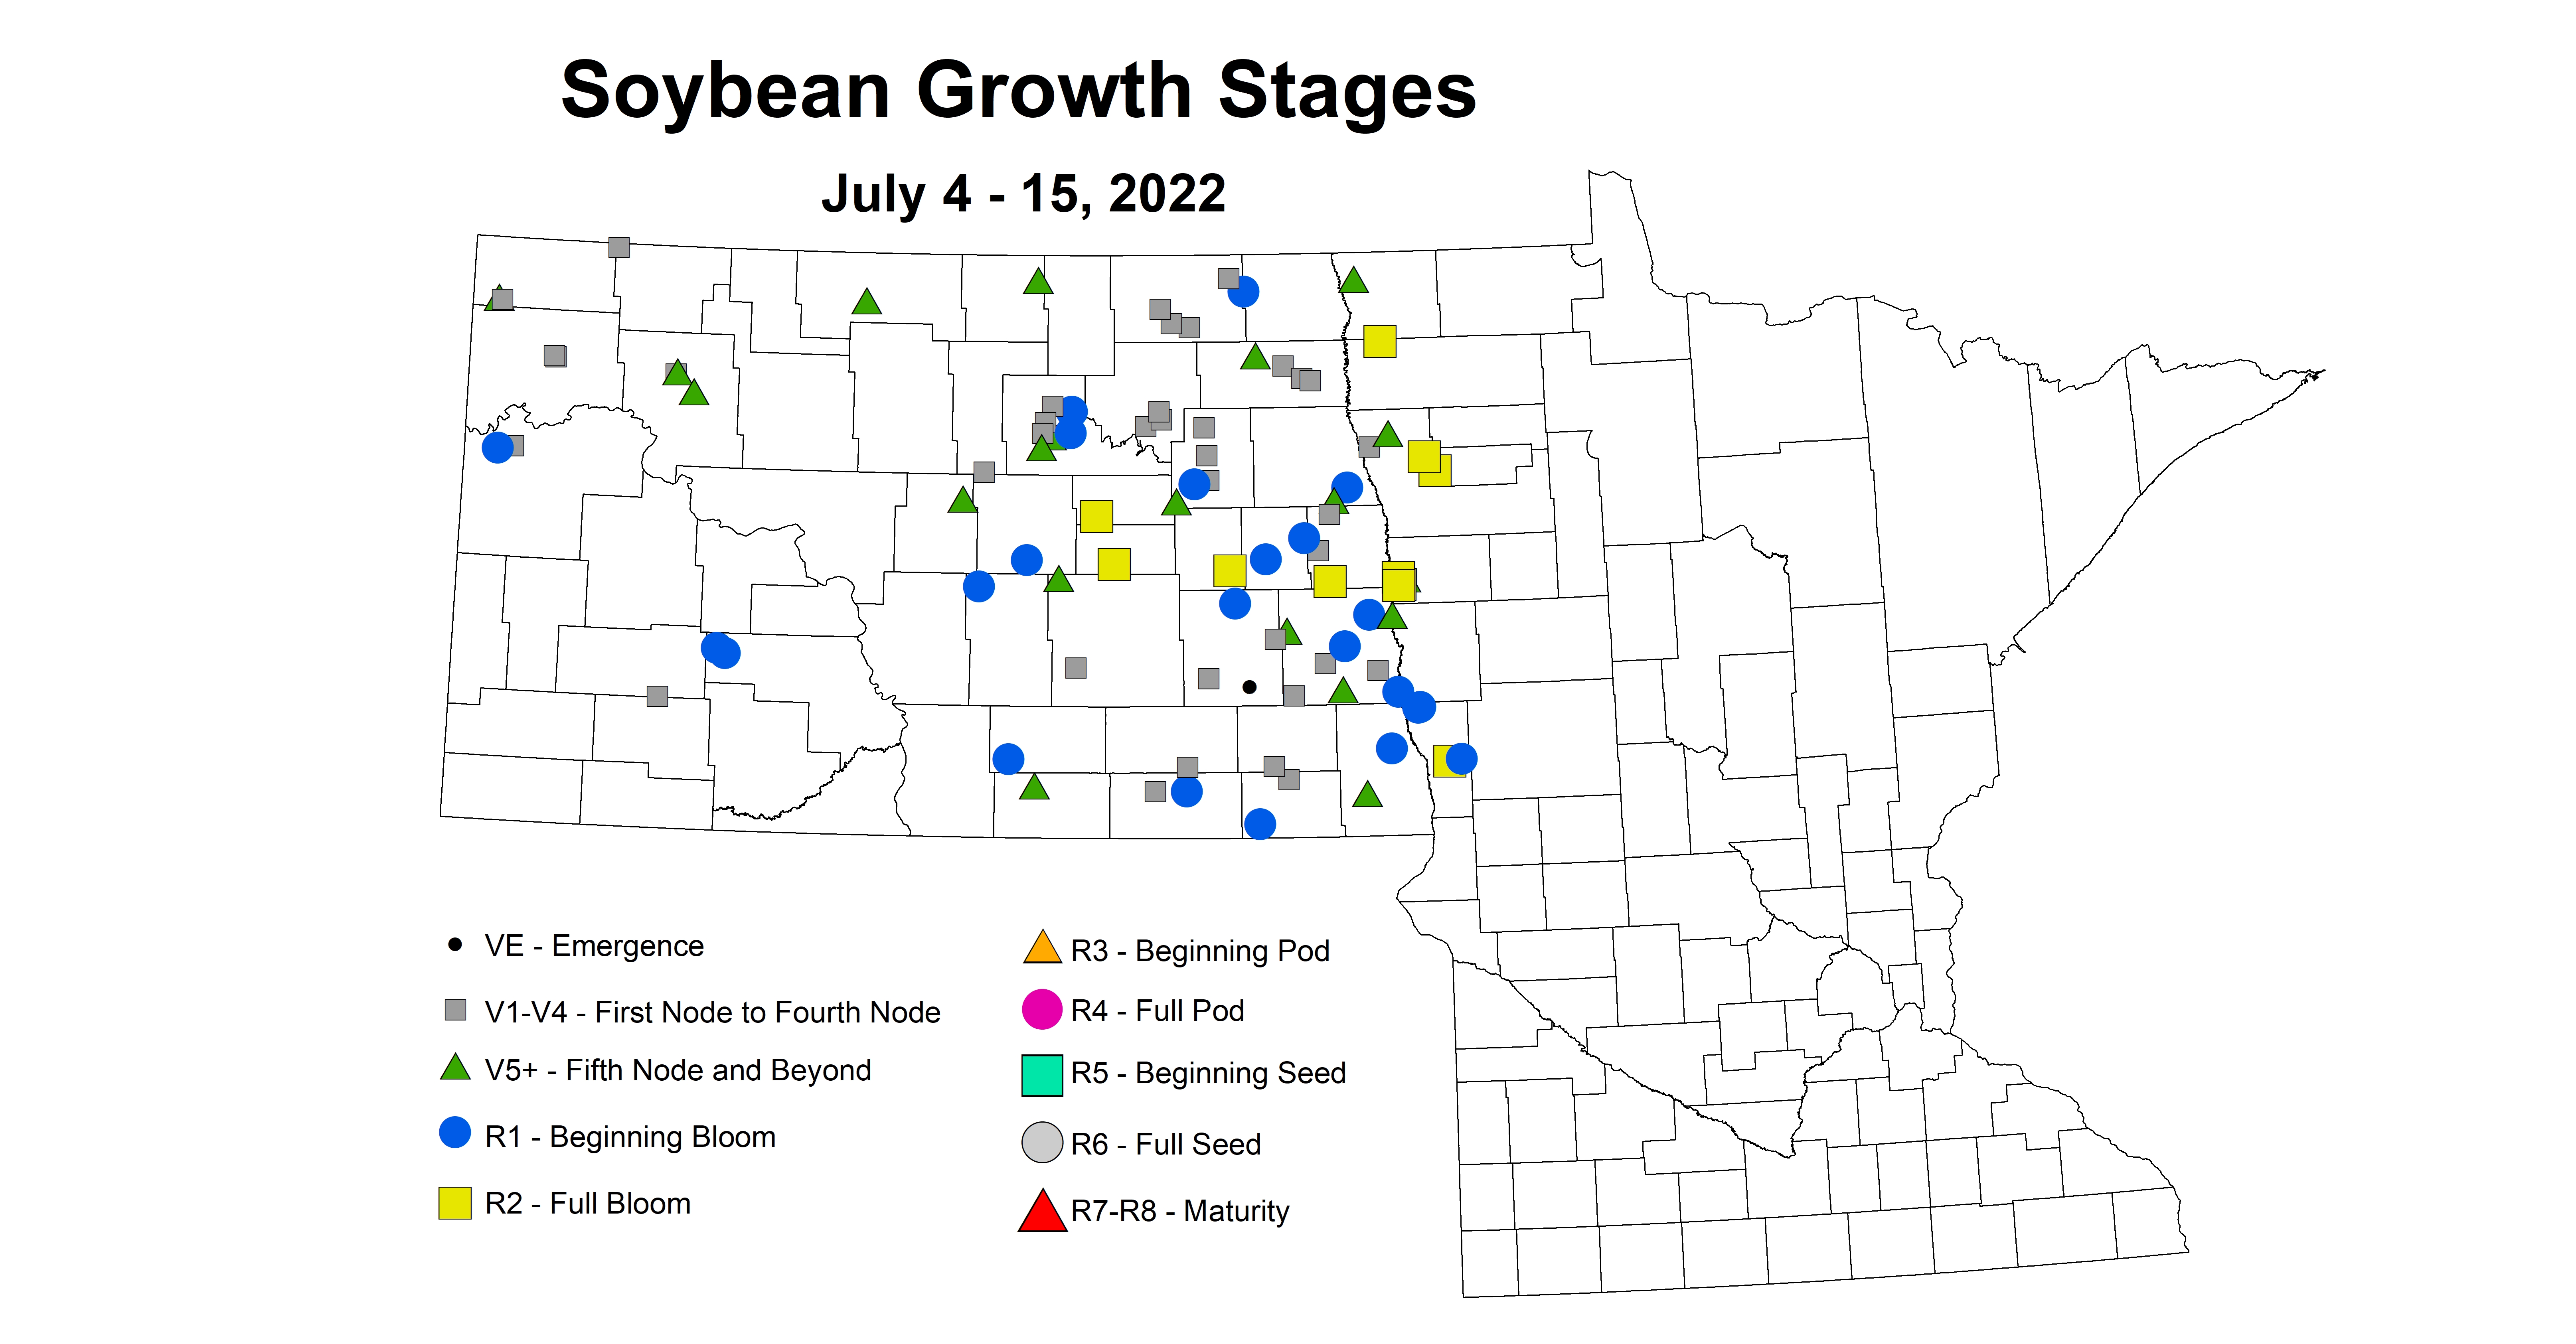 soybean growth stages 2022 7.4-7.15